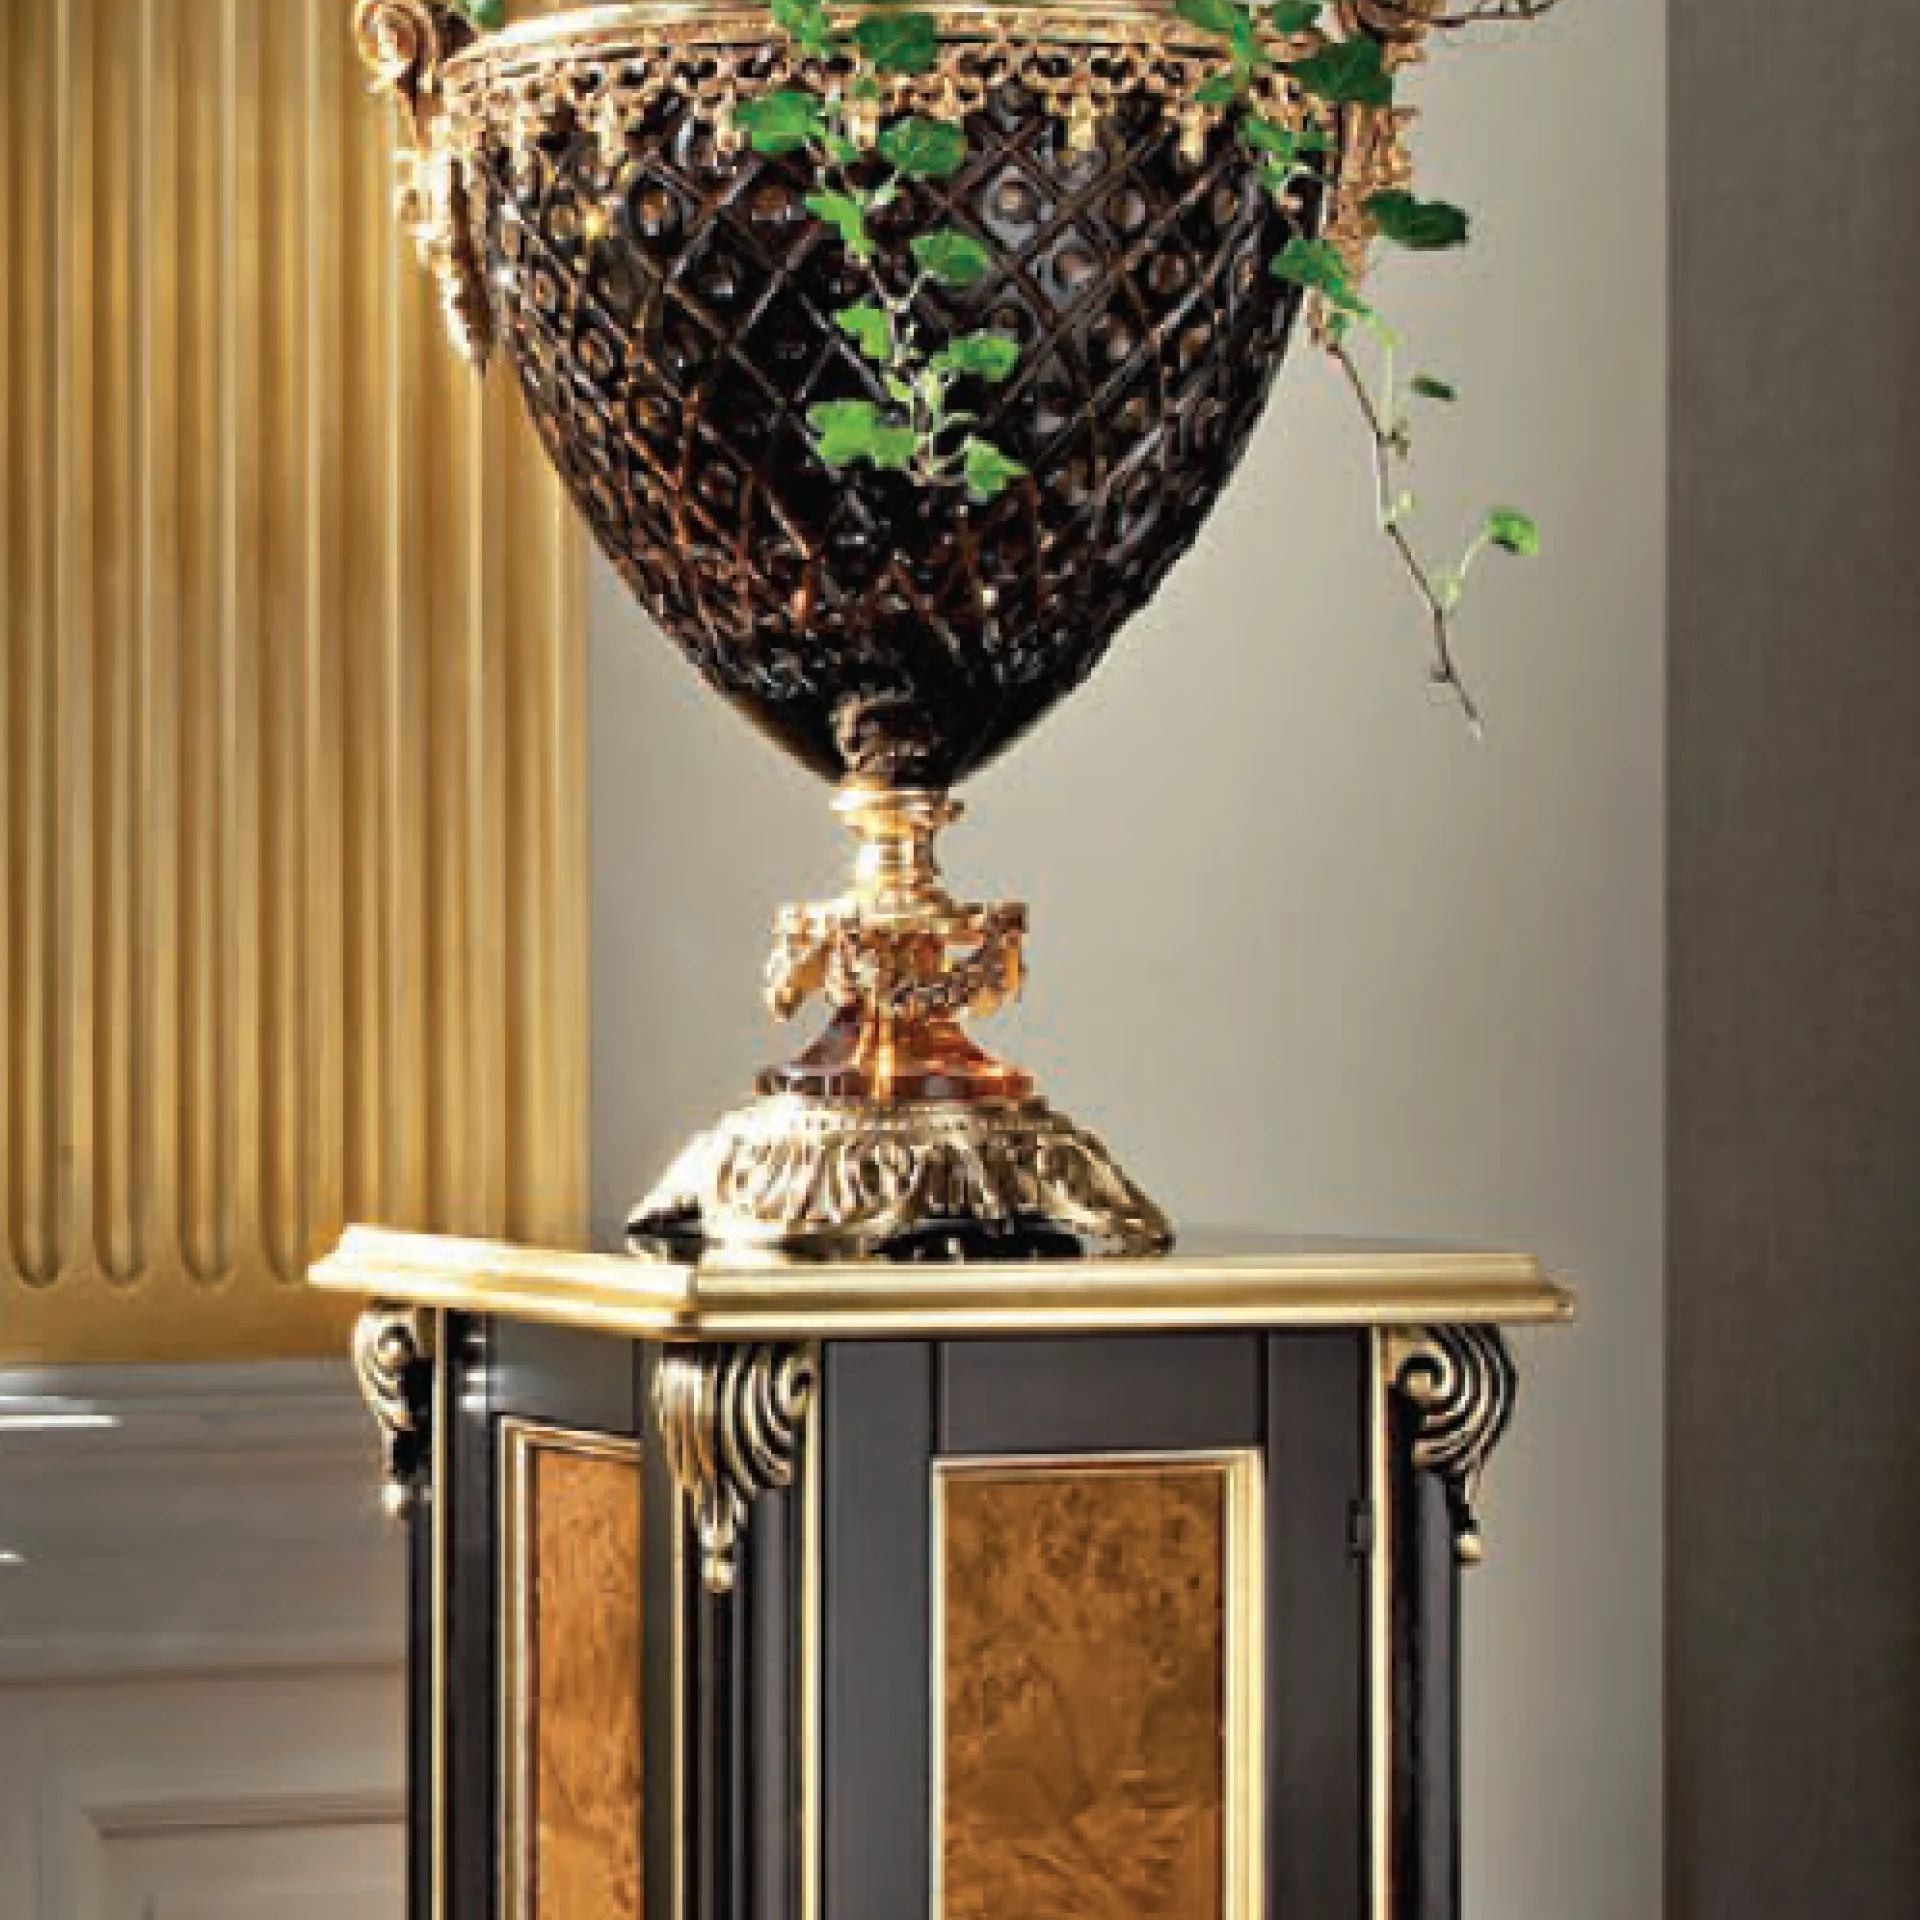 Timeless Dark Classic Design Vase with symmetrical lines and ornate details, exuding sophistication in luxury interiors.